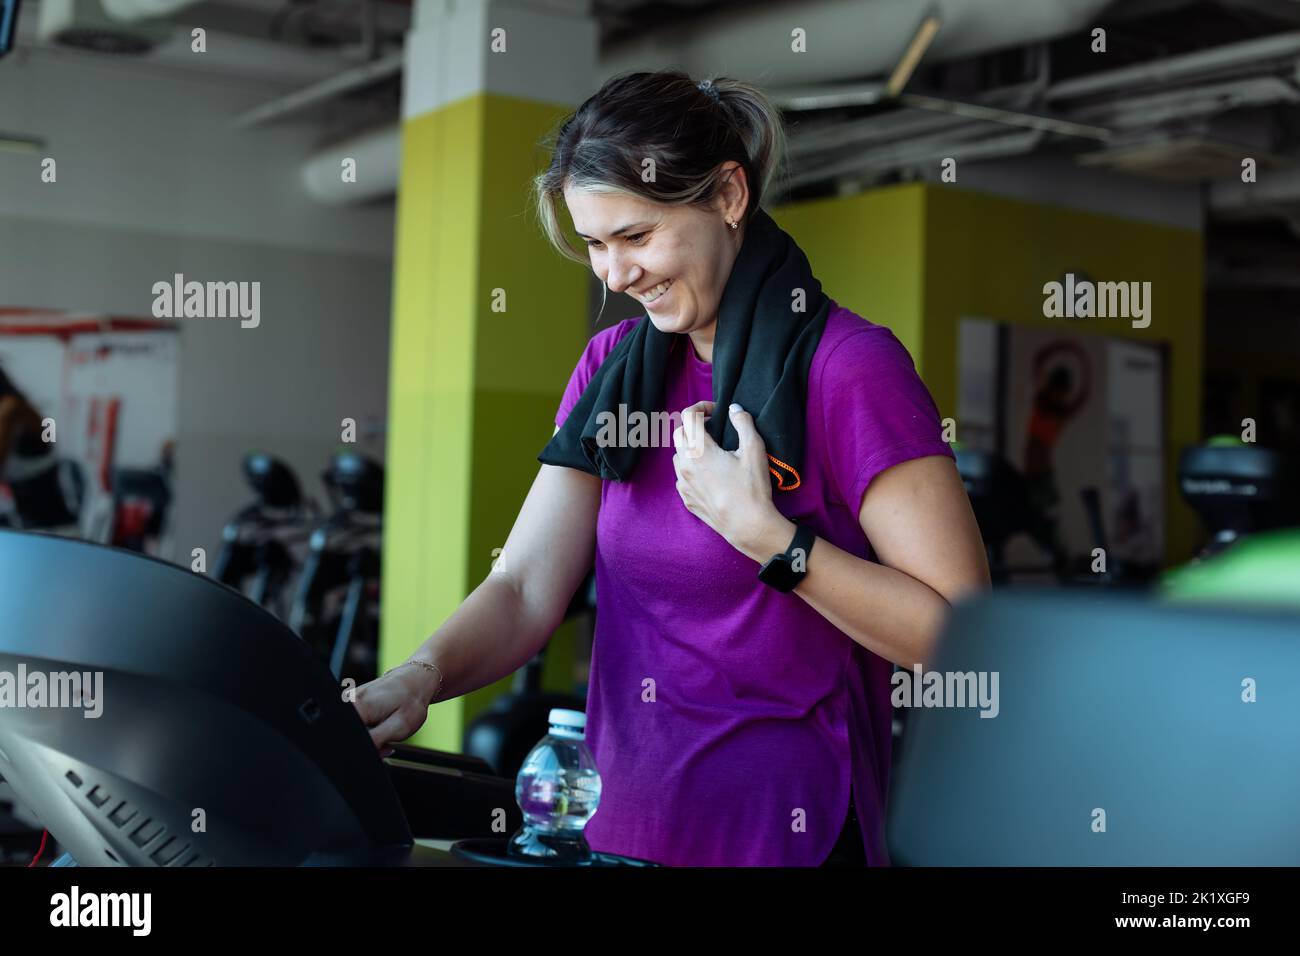 Happy overweight woman with smile run on treadmill at fitness gym with towel hanging around neck, side view. Young plus size girl do cardio workout on Stock Photo